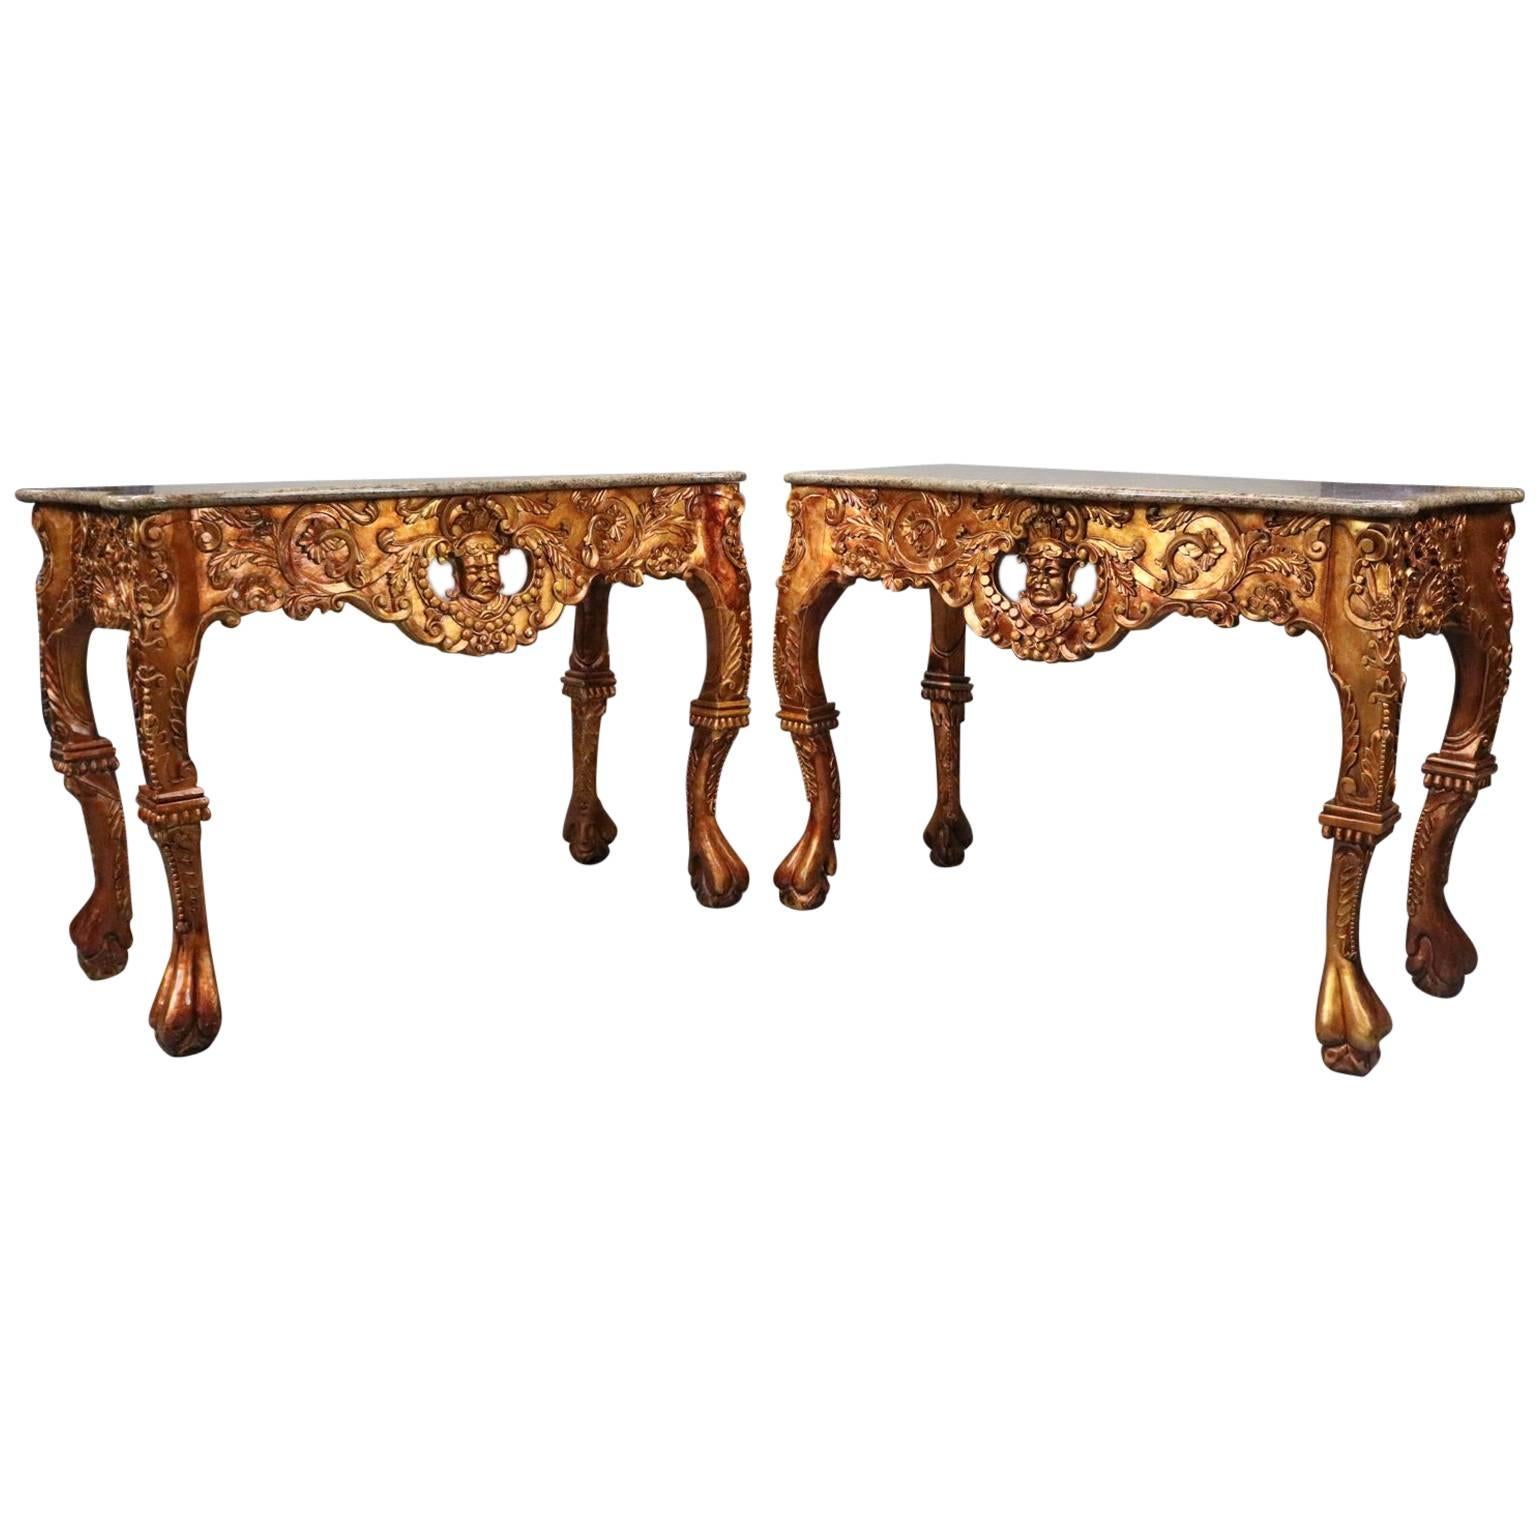 Pair of Vintage Asian Heavily Carved Giltwood Marble Top Console Tables